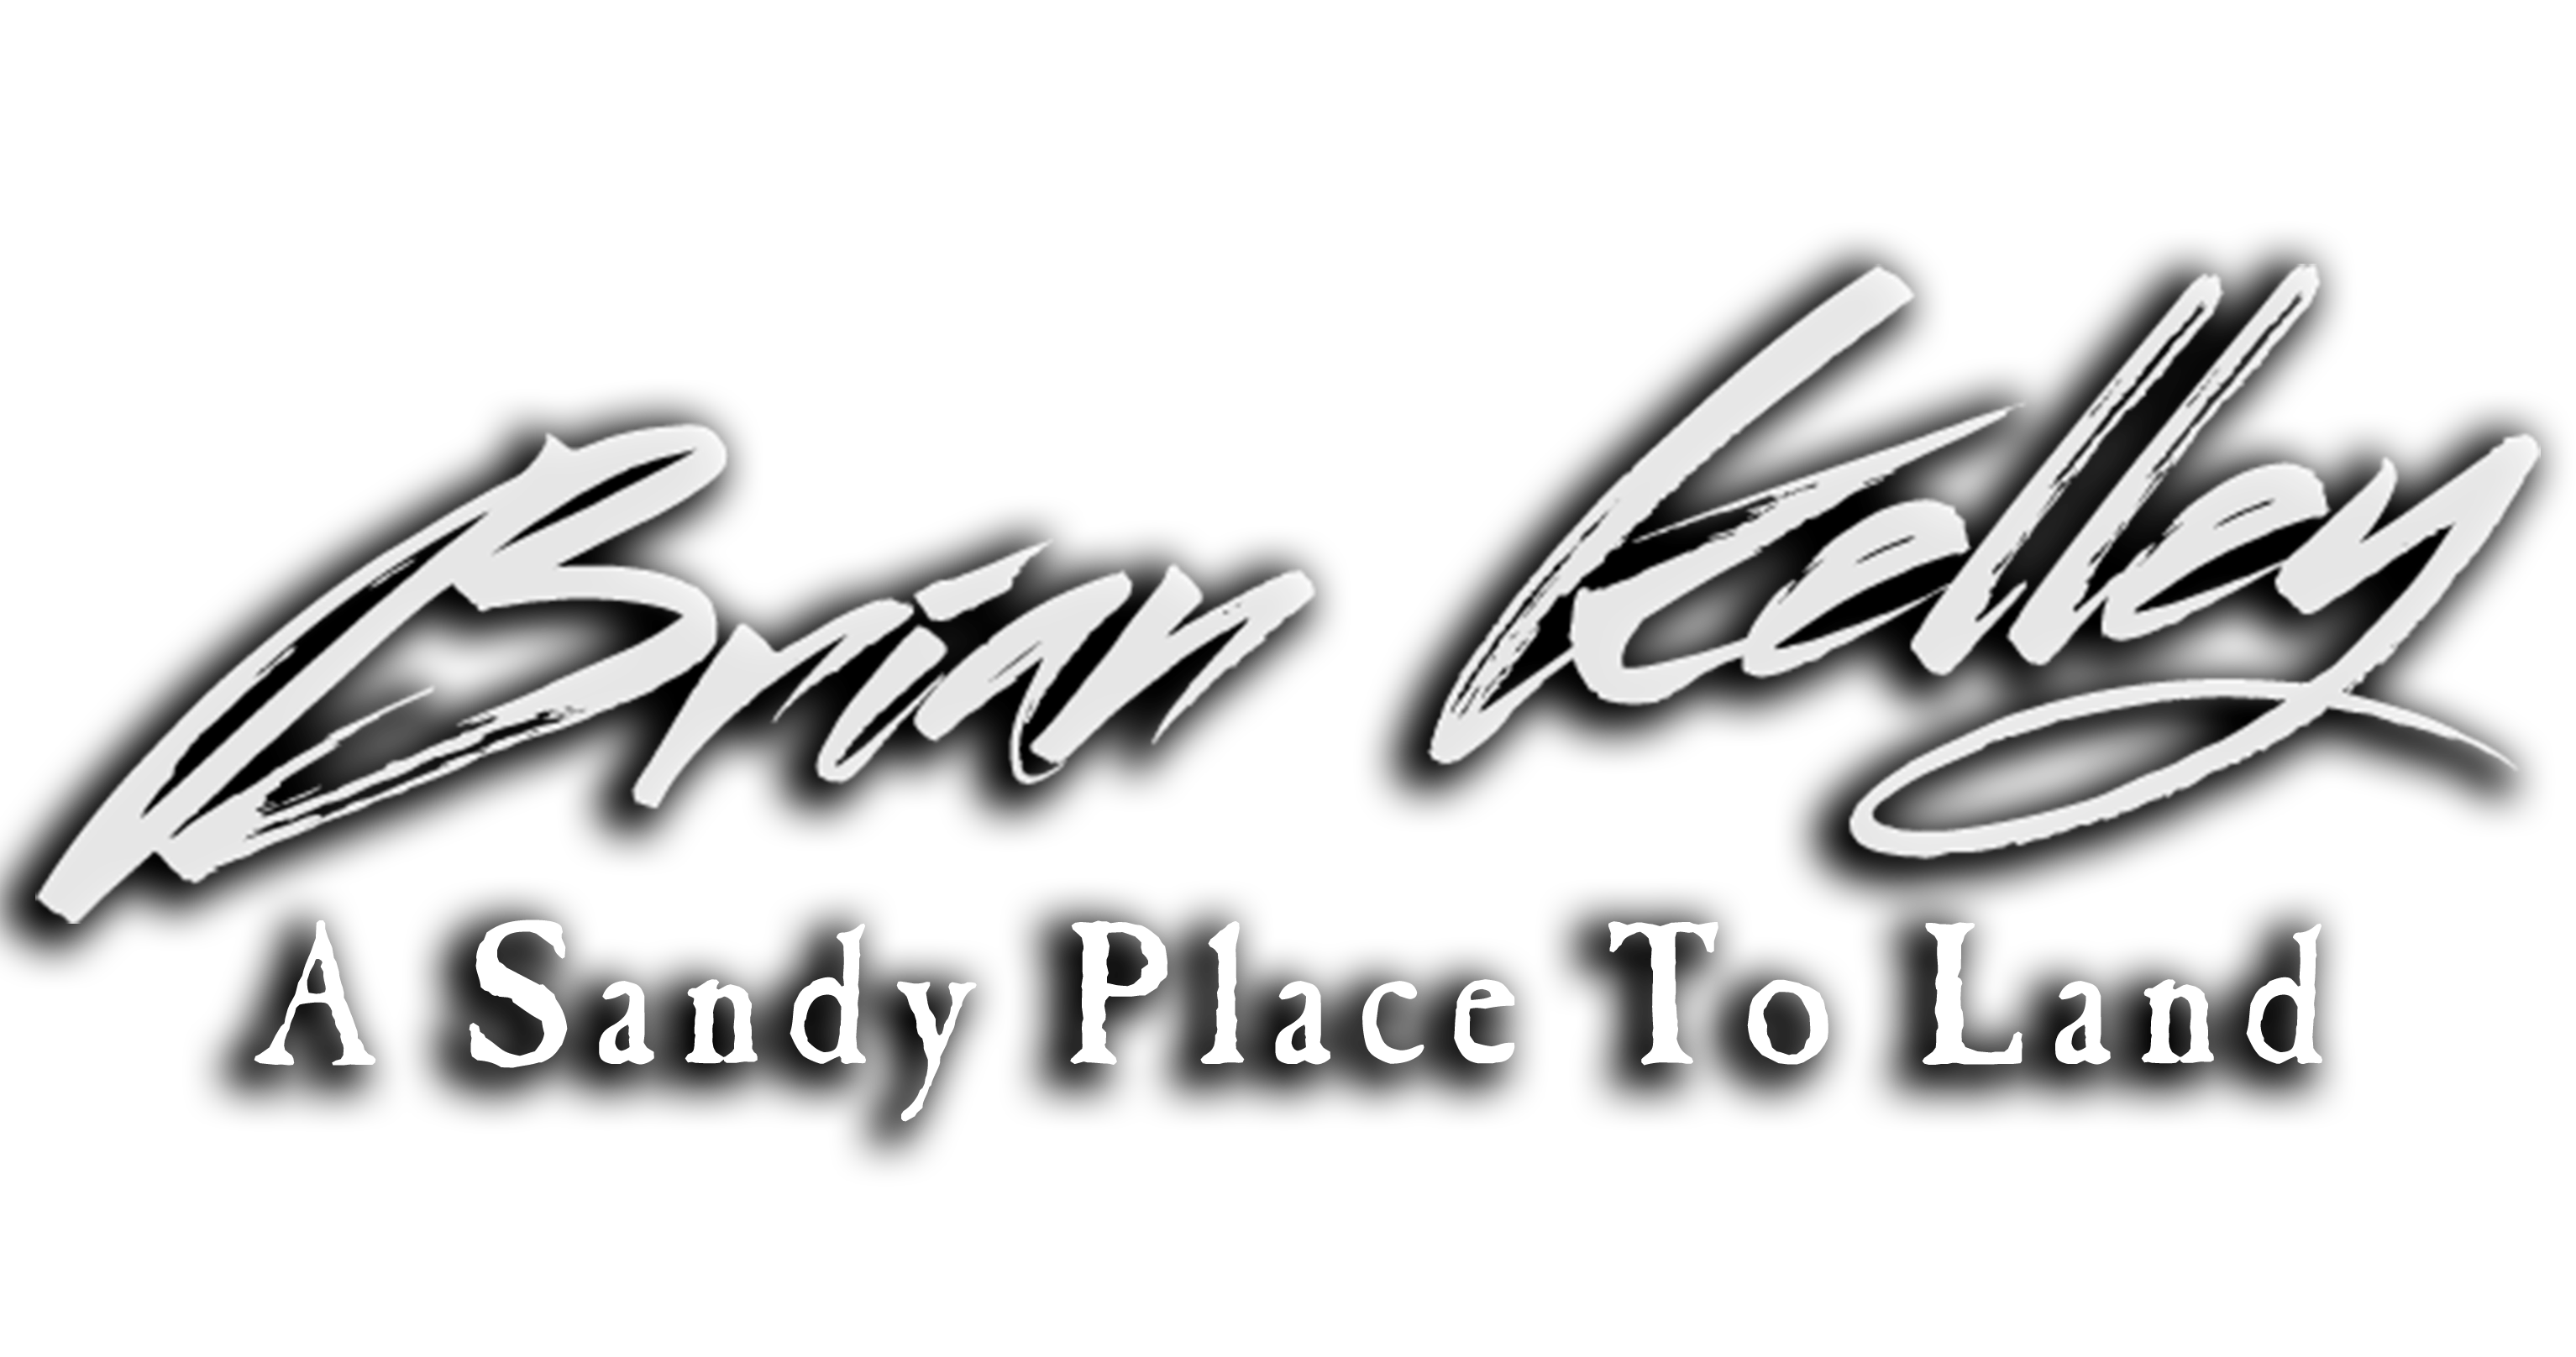 Brian Kelly | A Sandy Place to Land